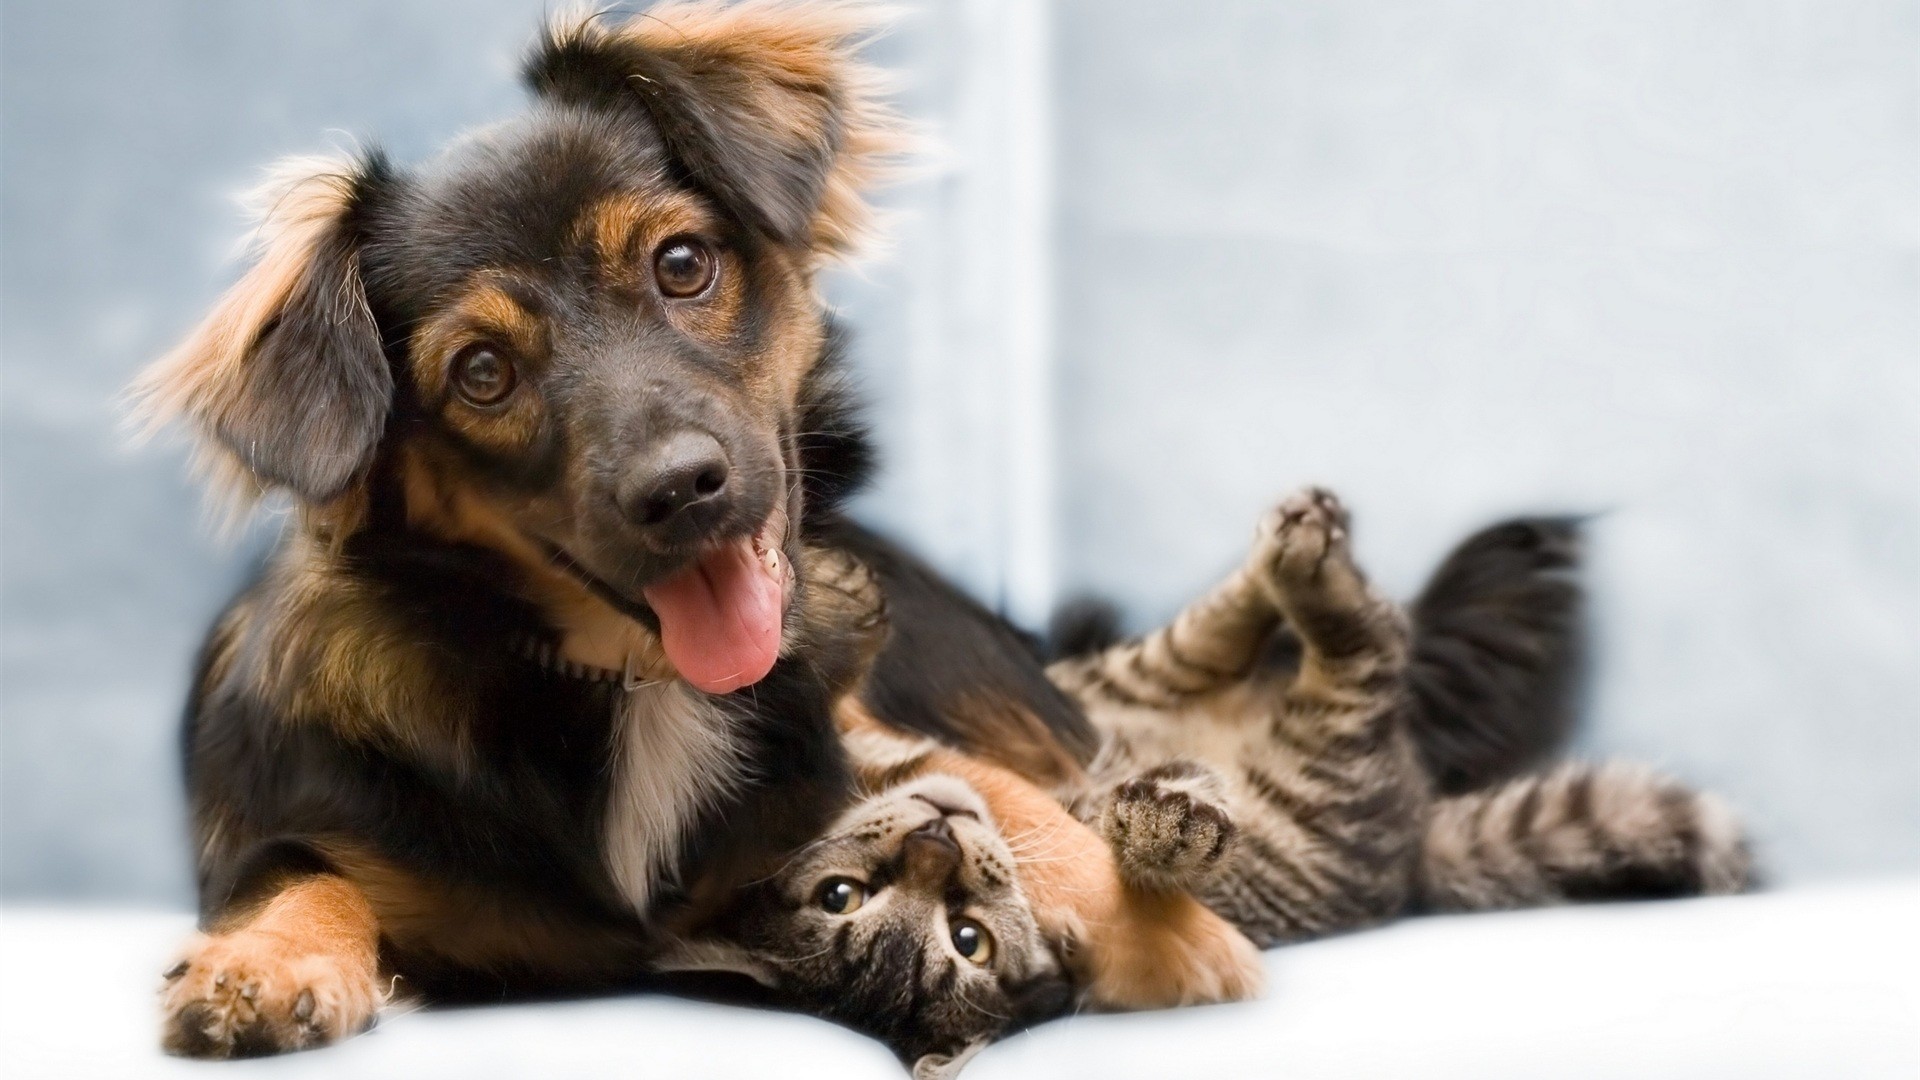 1920x1080 cats and dogs – Friendship | Download Desktop Wallpapers - Suit Up .